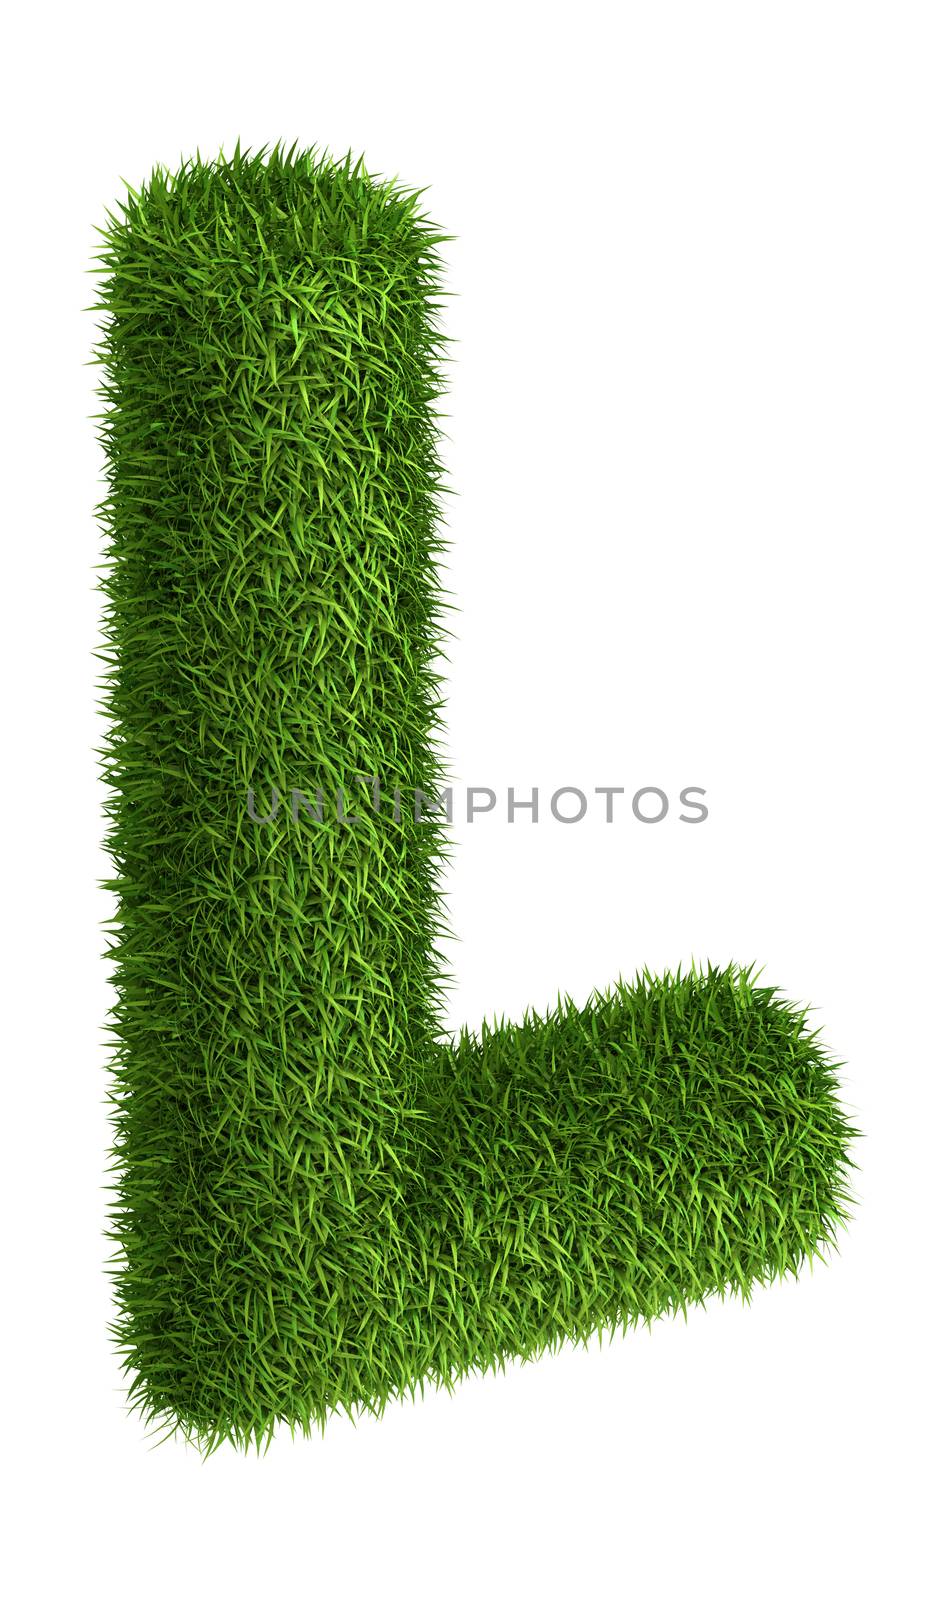 Natural grass letter L by iunewind